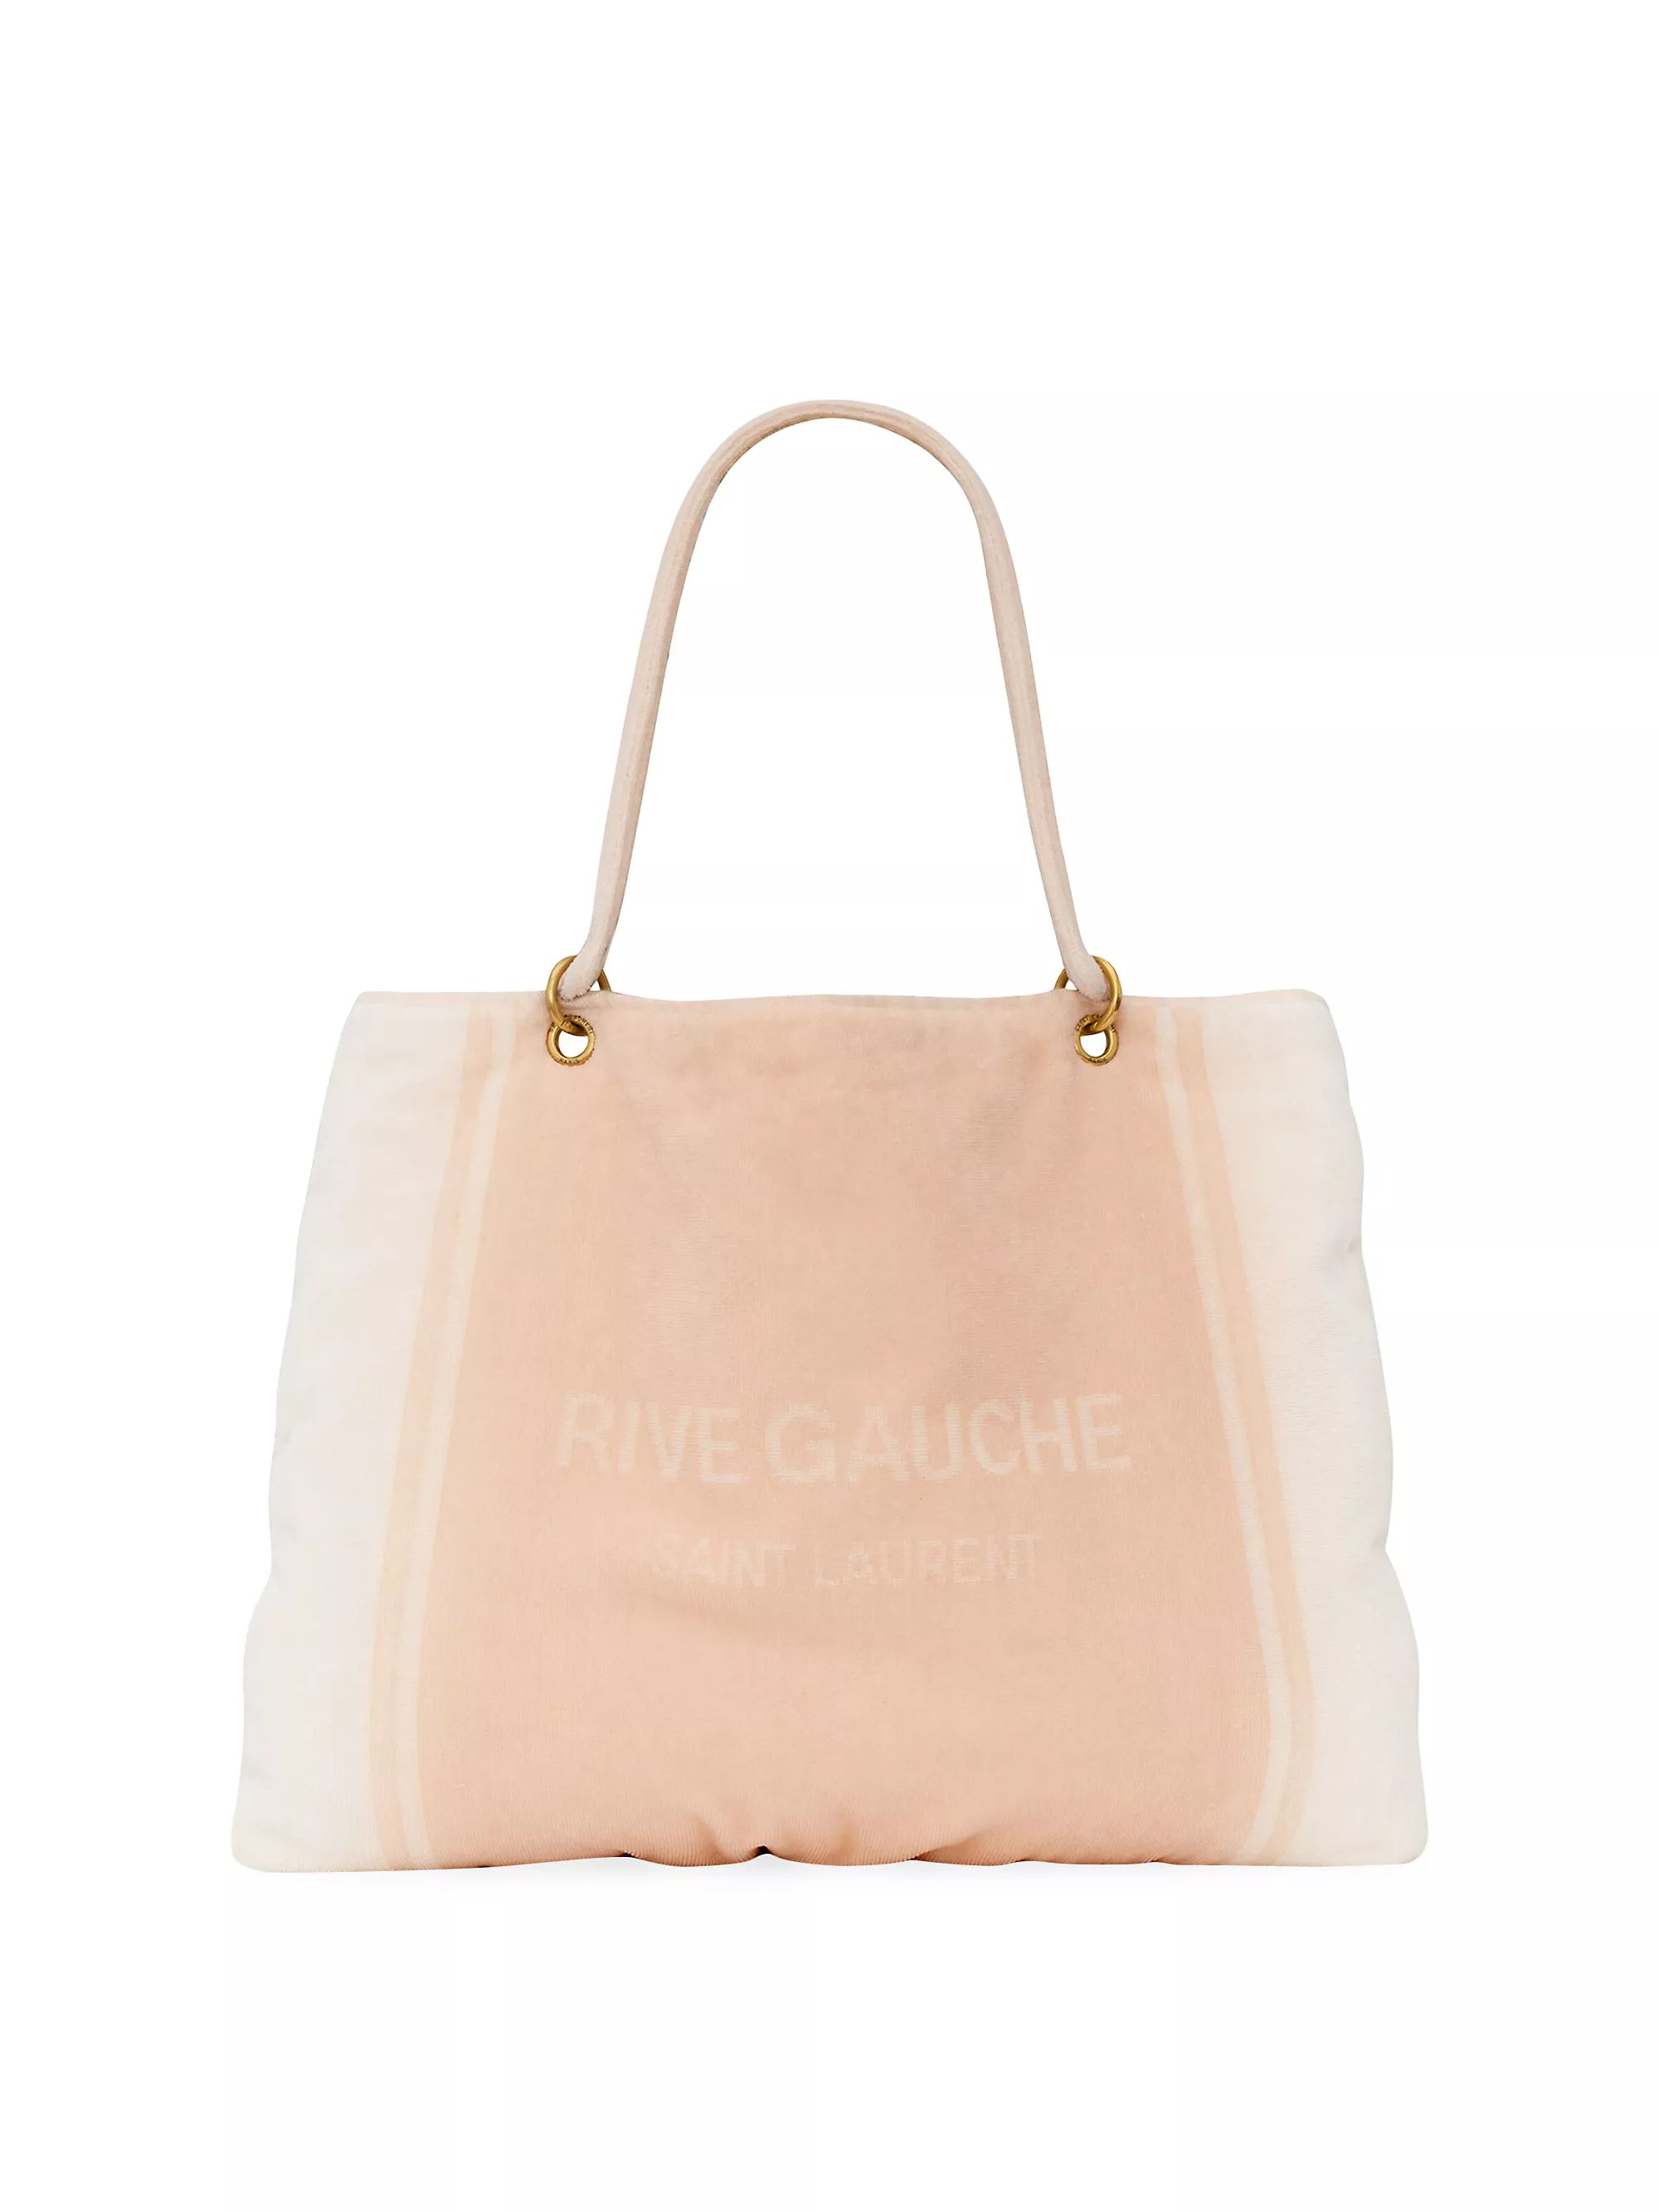 Rive Gauche Towel Tote Bag in Terry Cloth | Saks Fifth Avenue